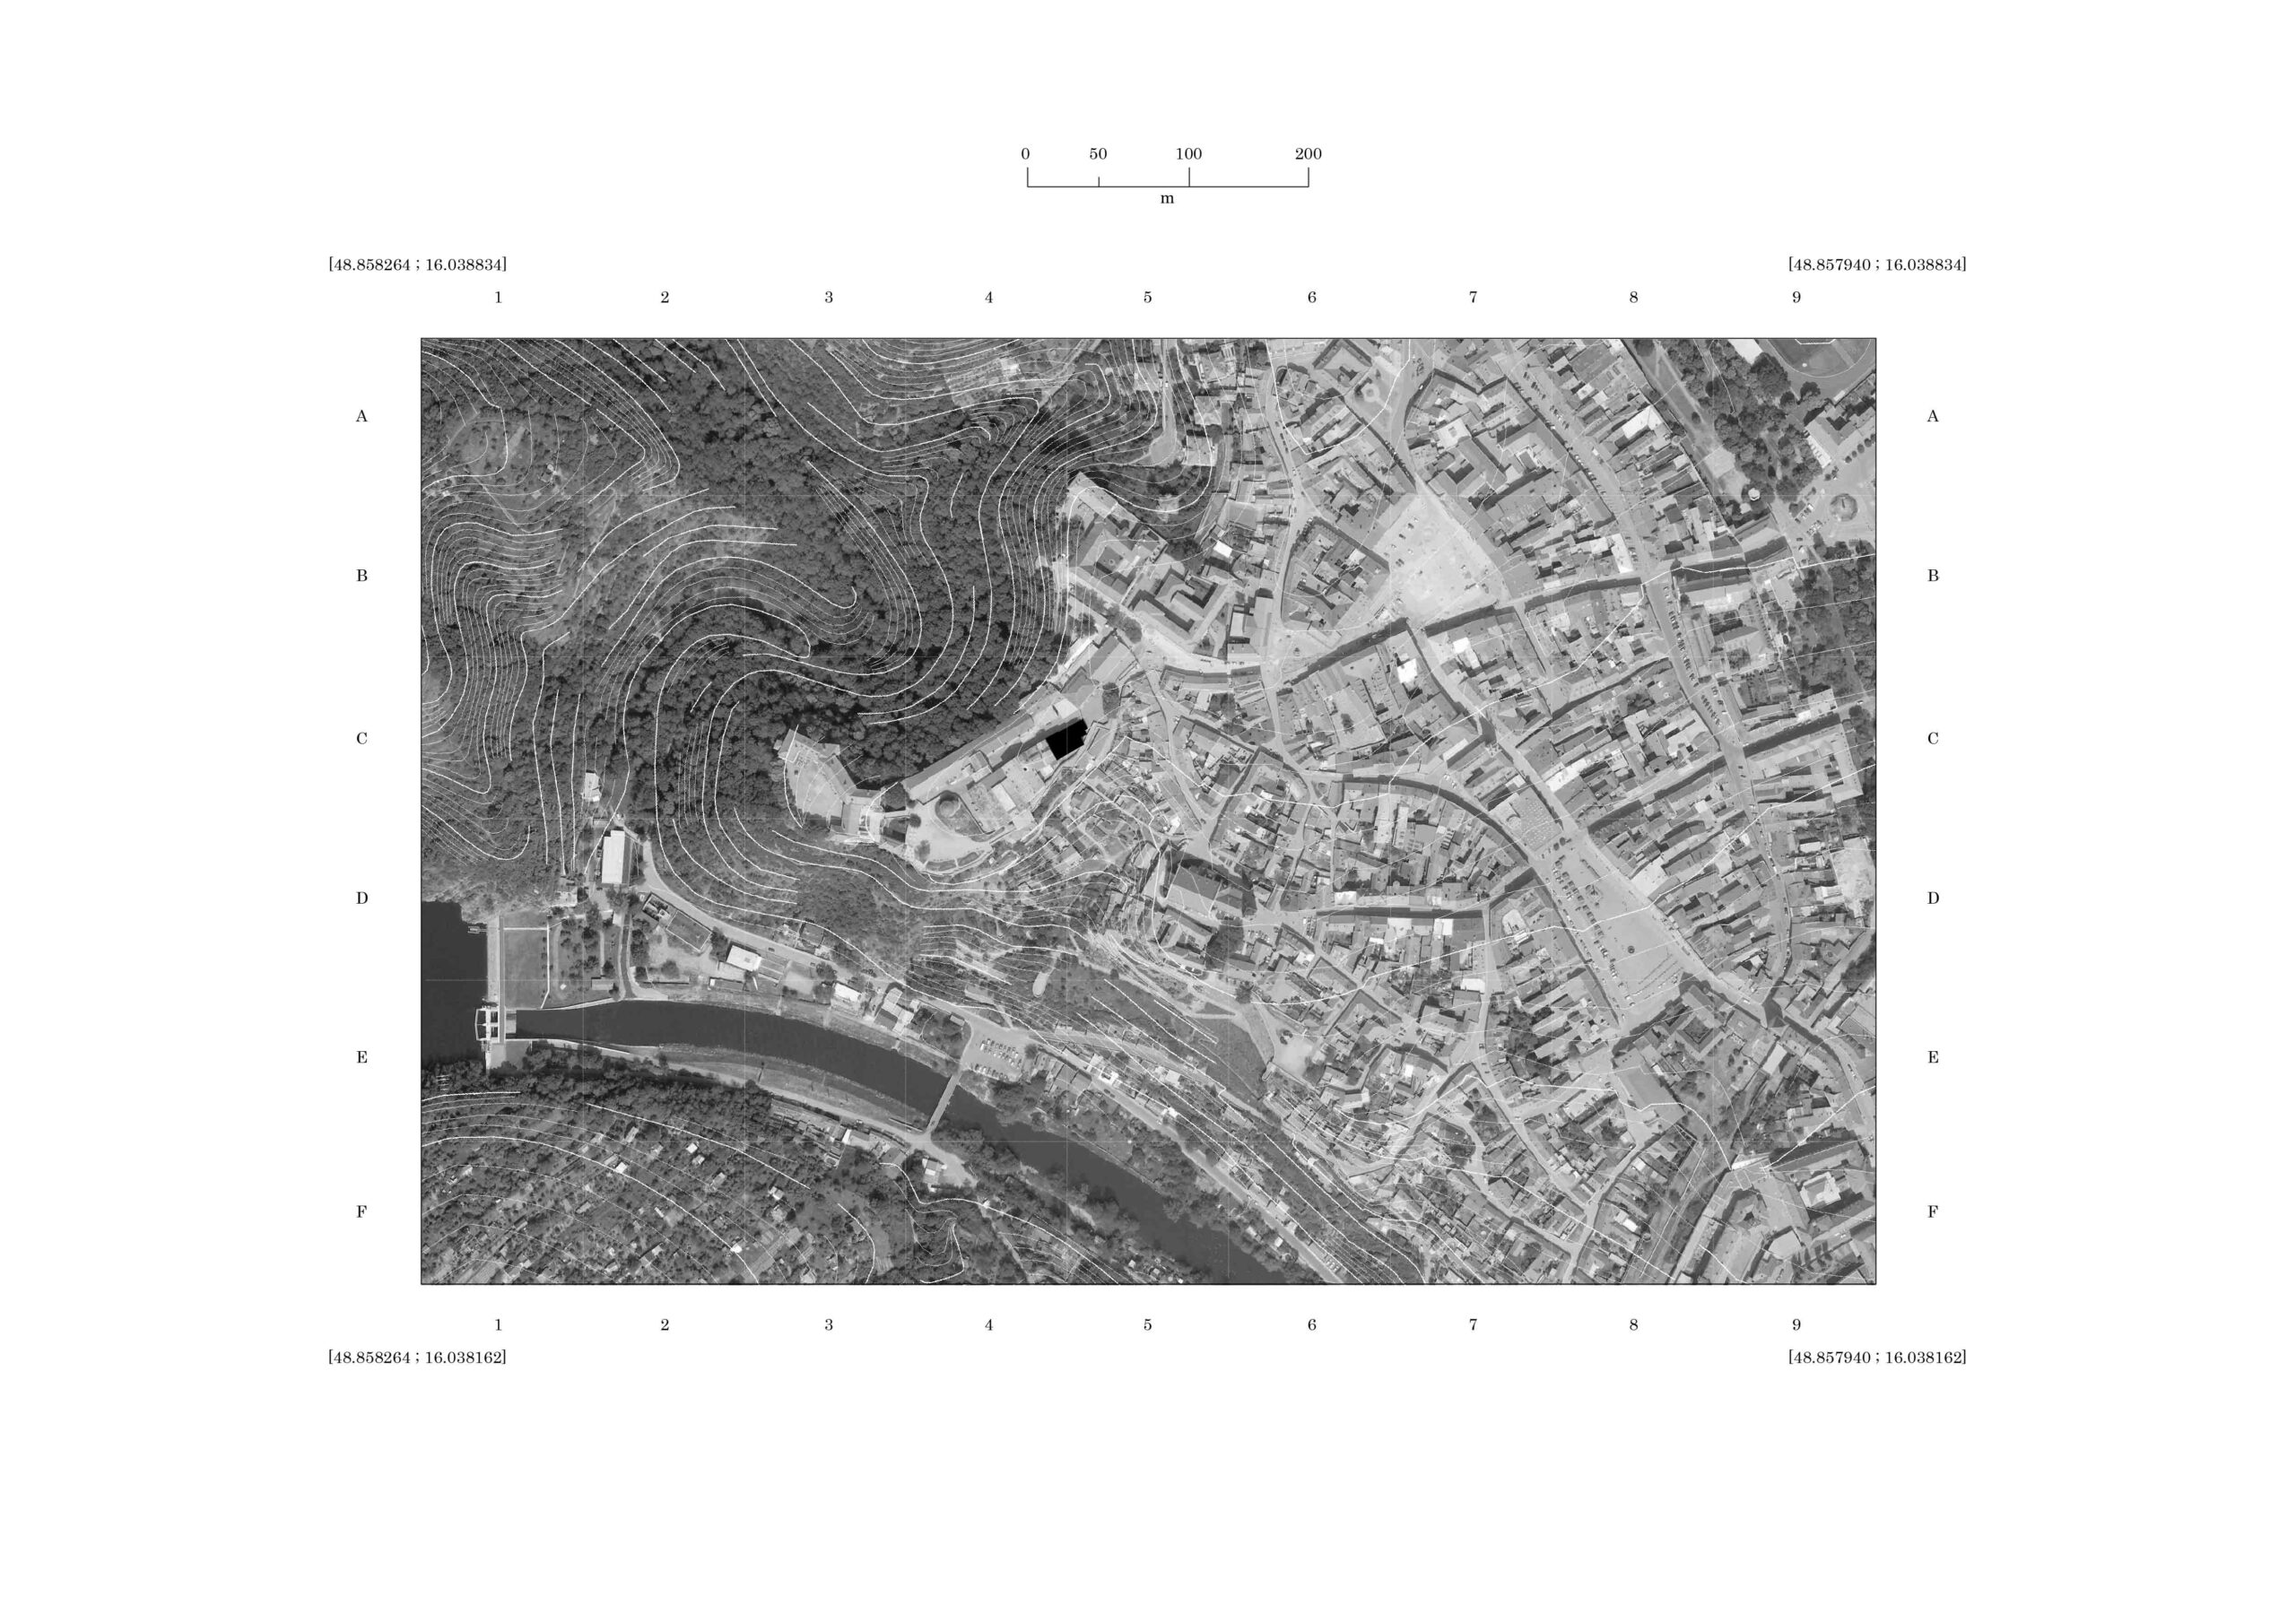 Image of 03 Chybik Kristof HoW map of znojmo scaled 1 in House of Wine - Cosentino